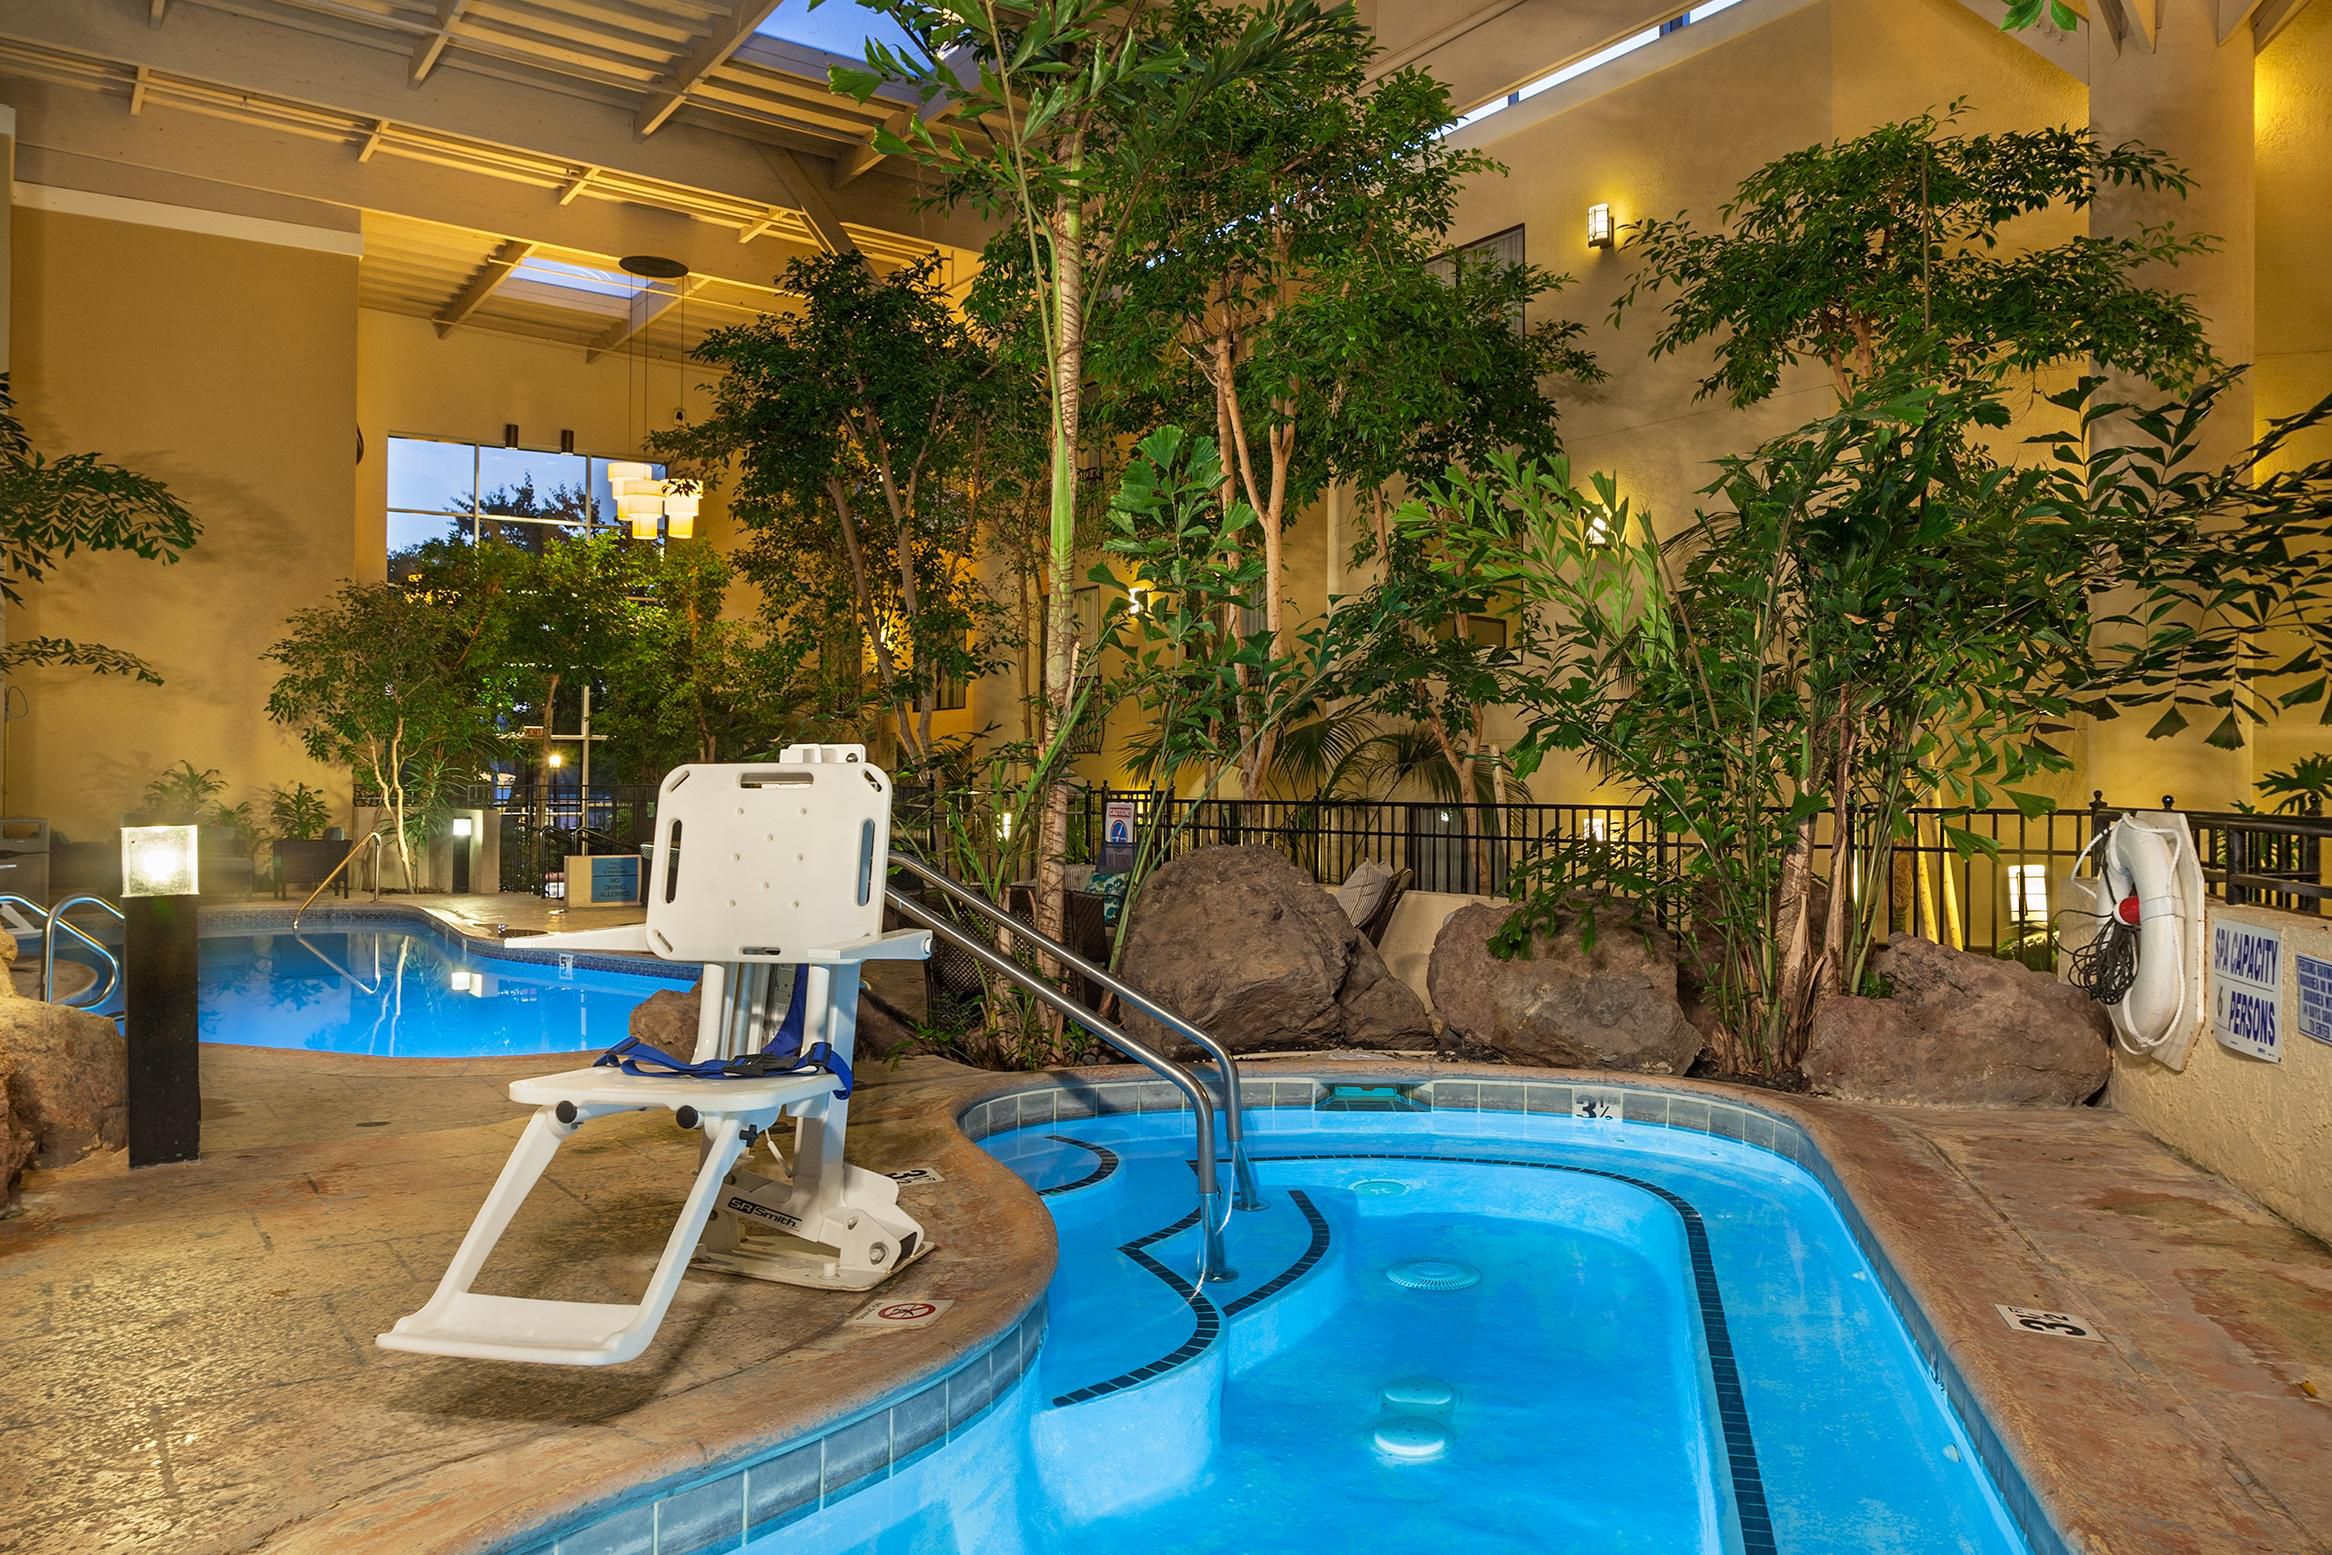 Enjoy a relaxing day at the Pool and Whirlpool